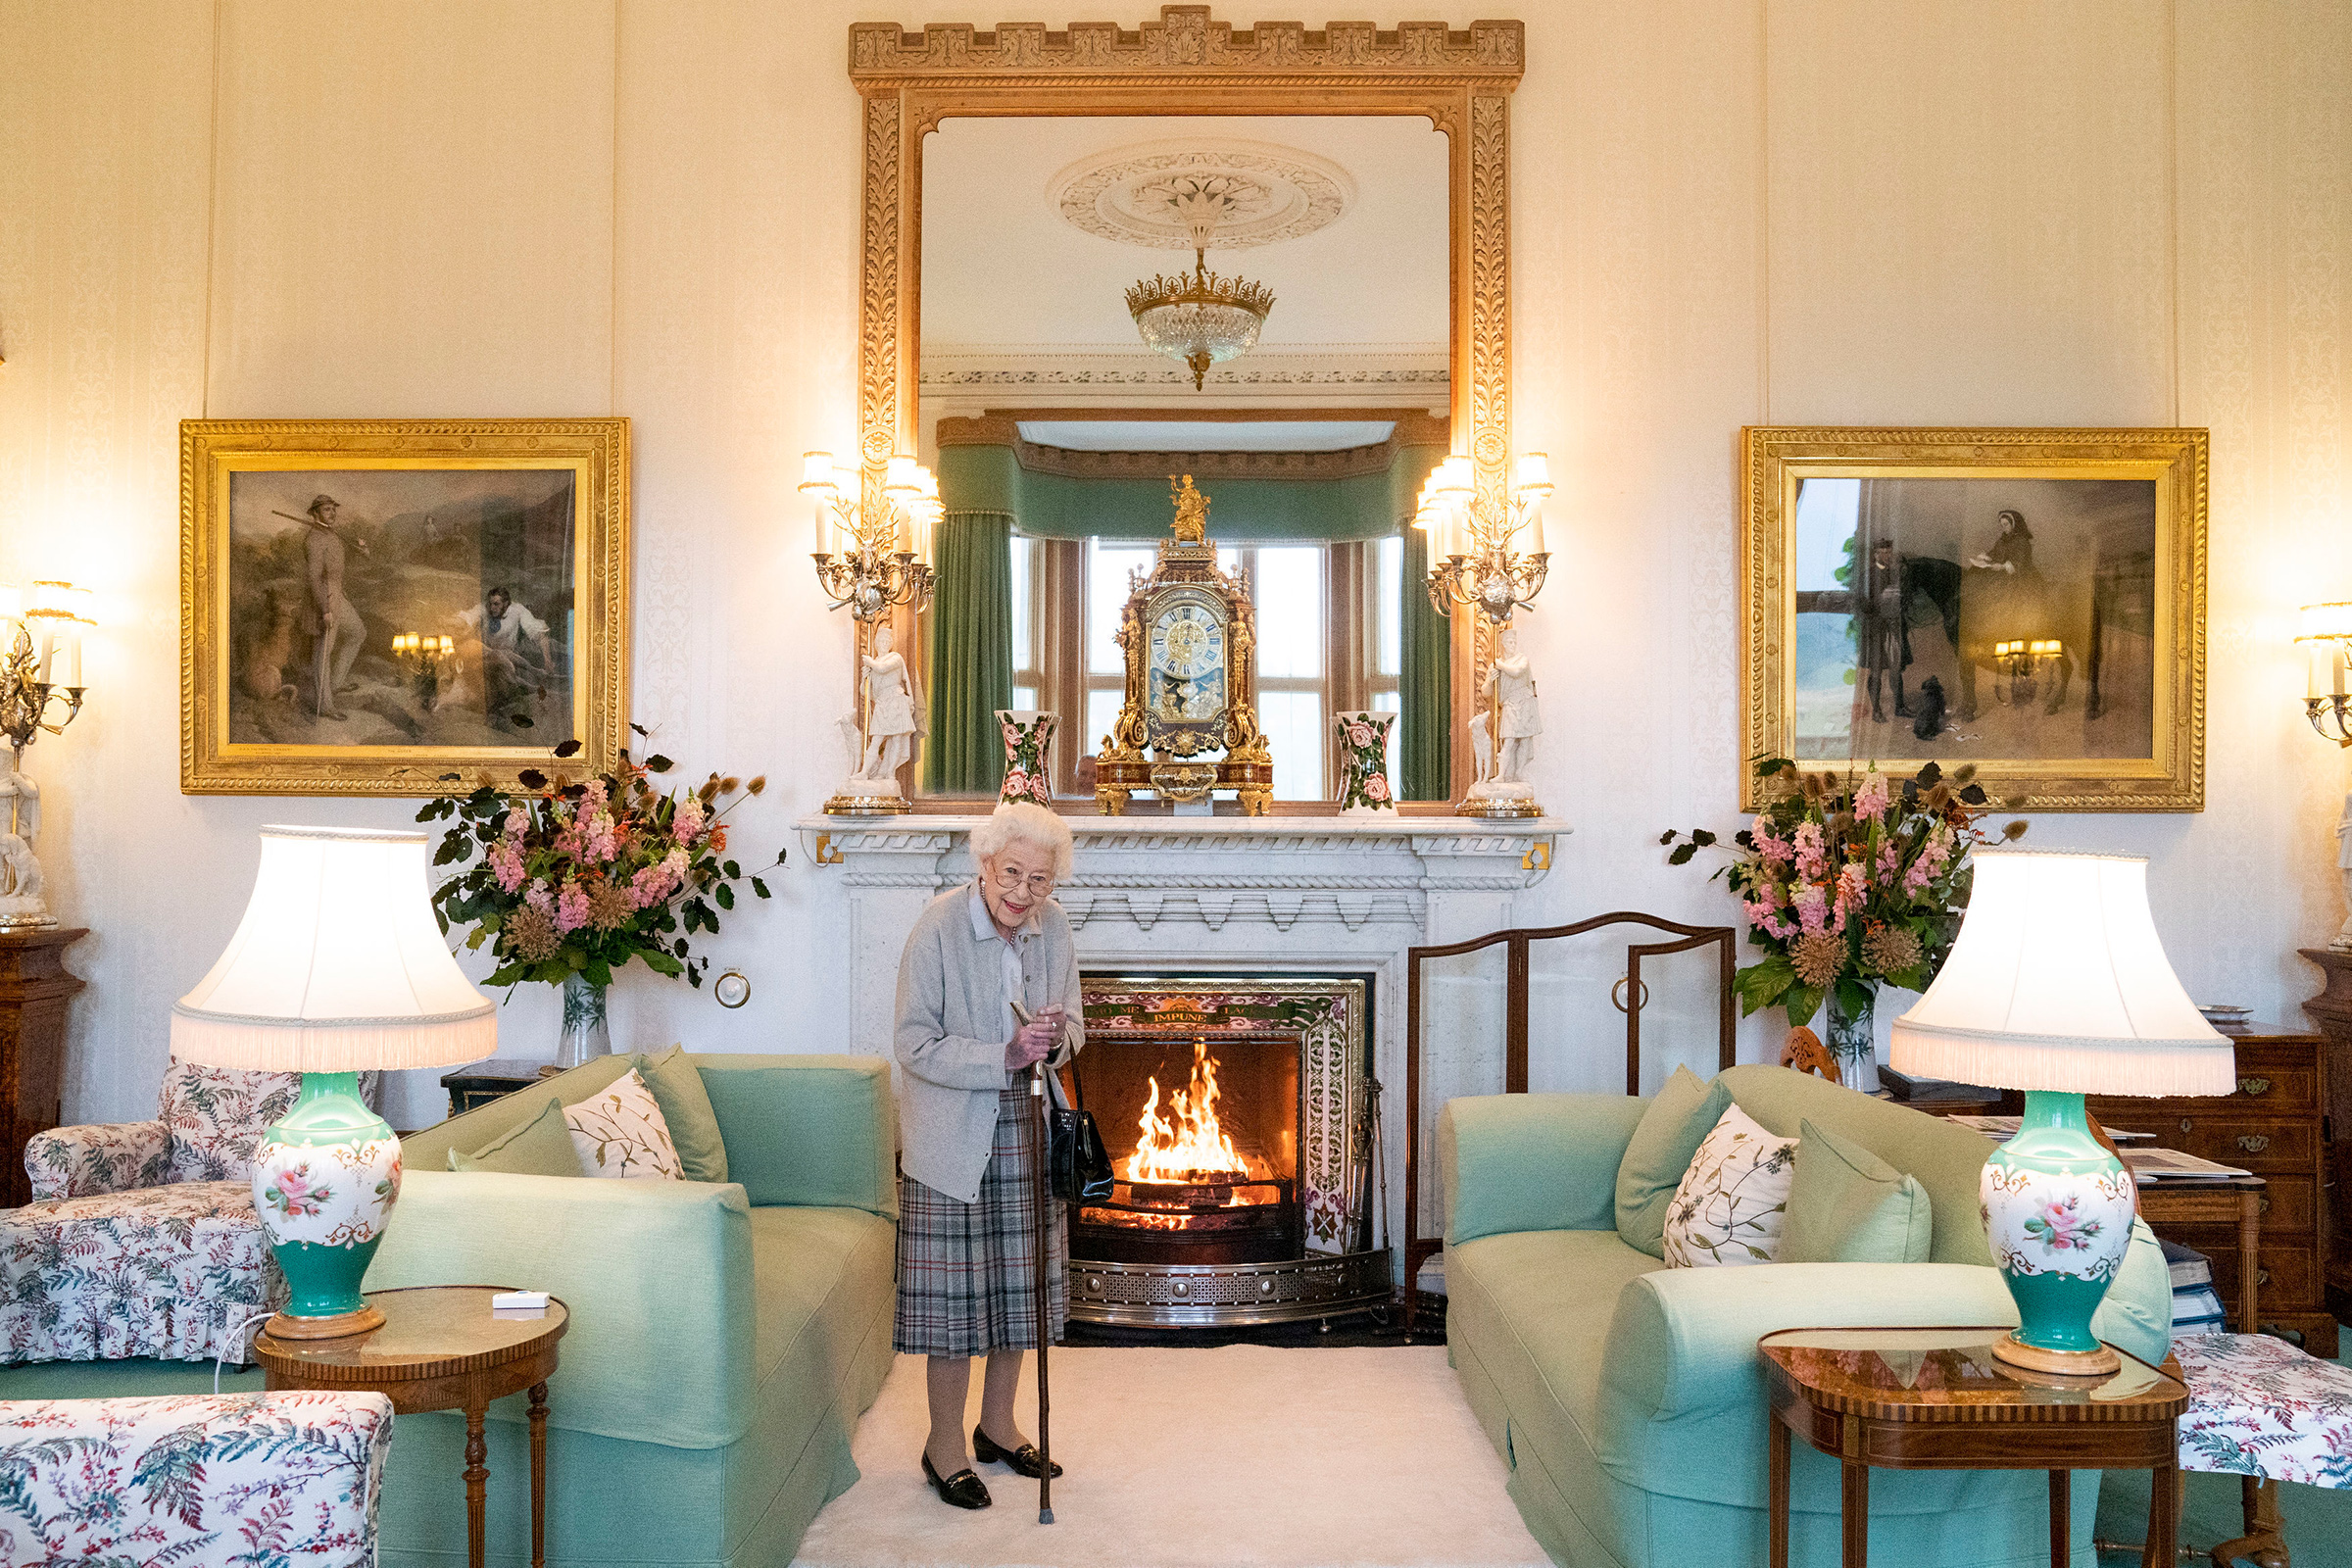 Britain's Queen Elizabeth II waits in the drawing room before receiving Liz Truss for an audience at Balmoral, where Truss has been invited to become prime minister and form a new government, in Aberdeenshire, Scotland, on September 6, 2022. (Jane Barlow— Photo by pool/AP)